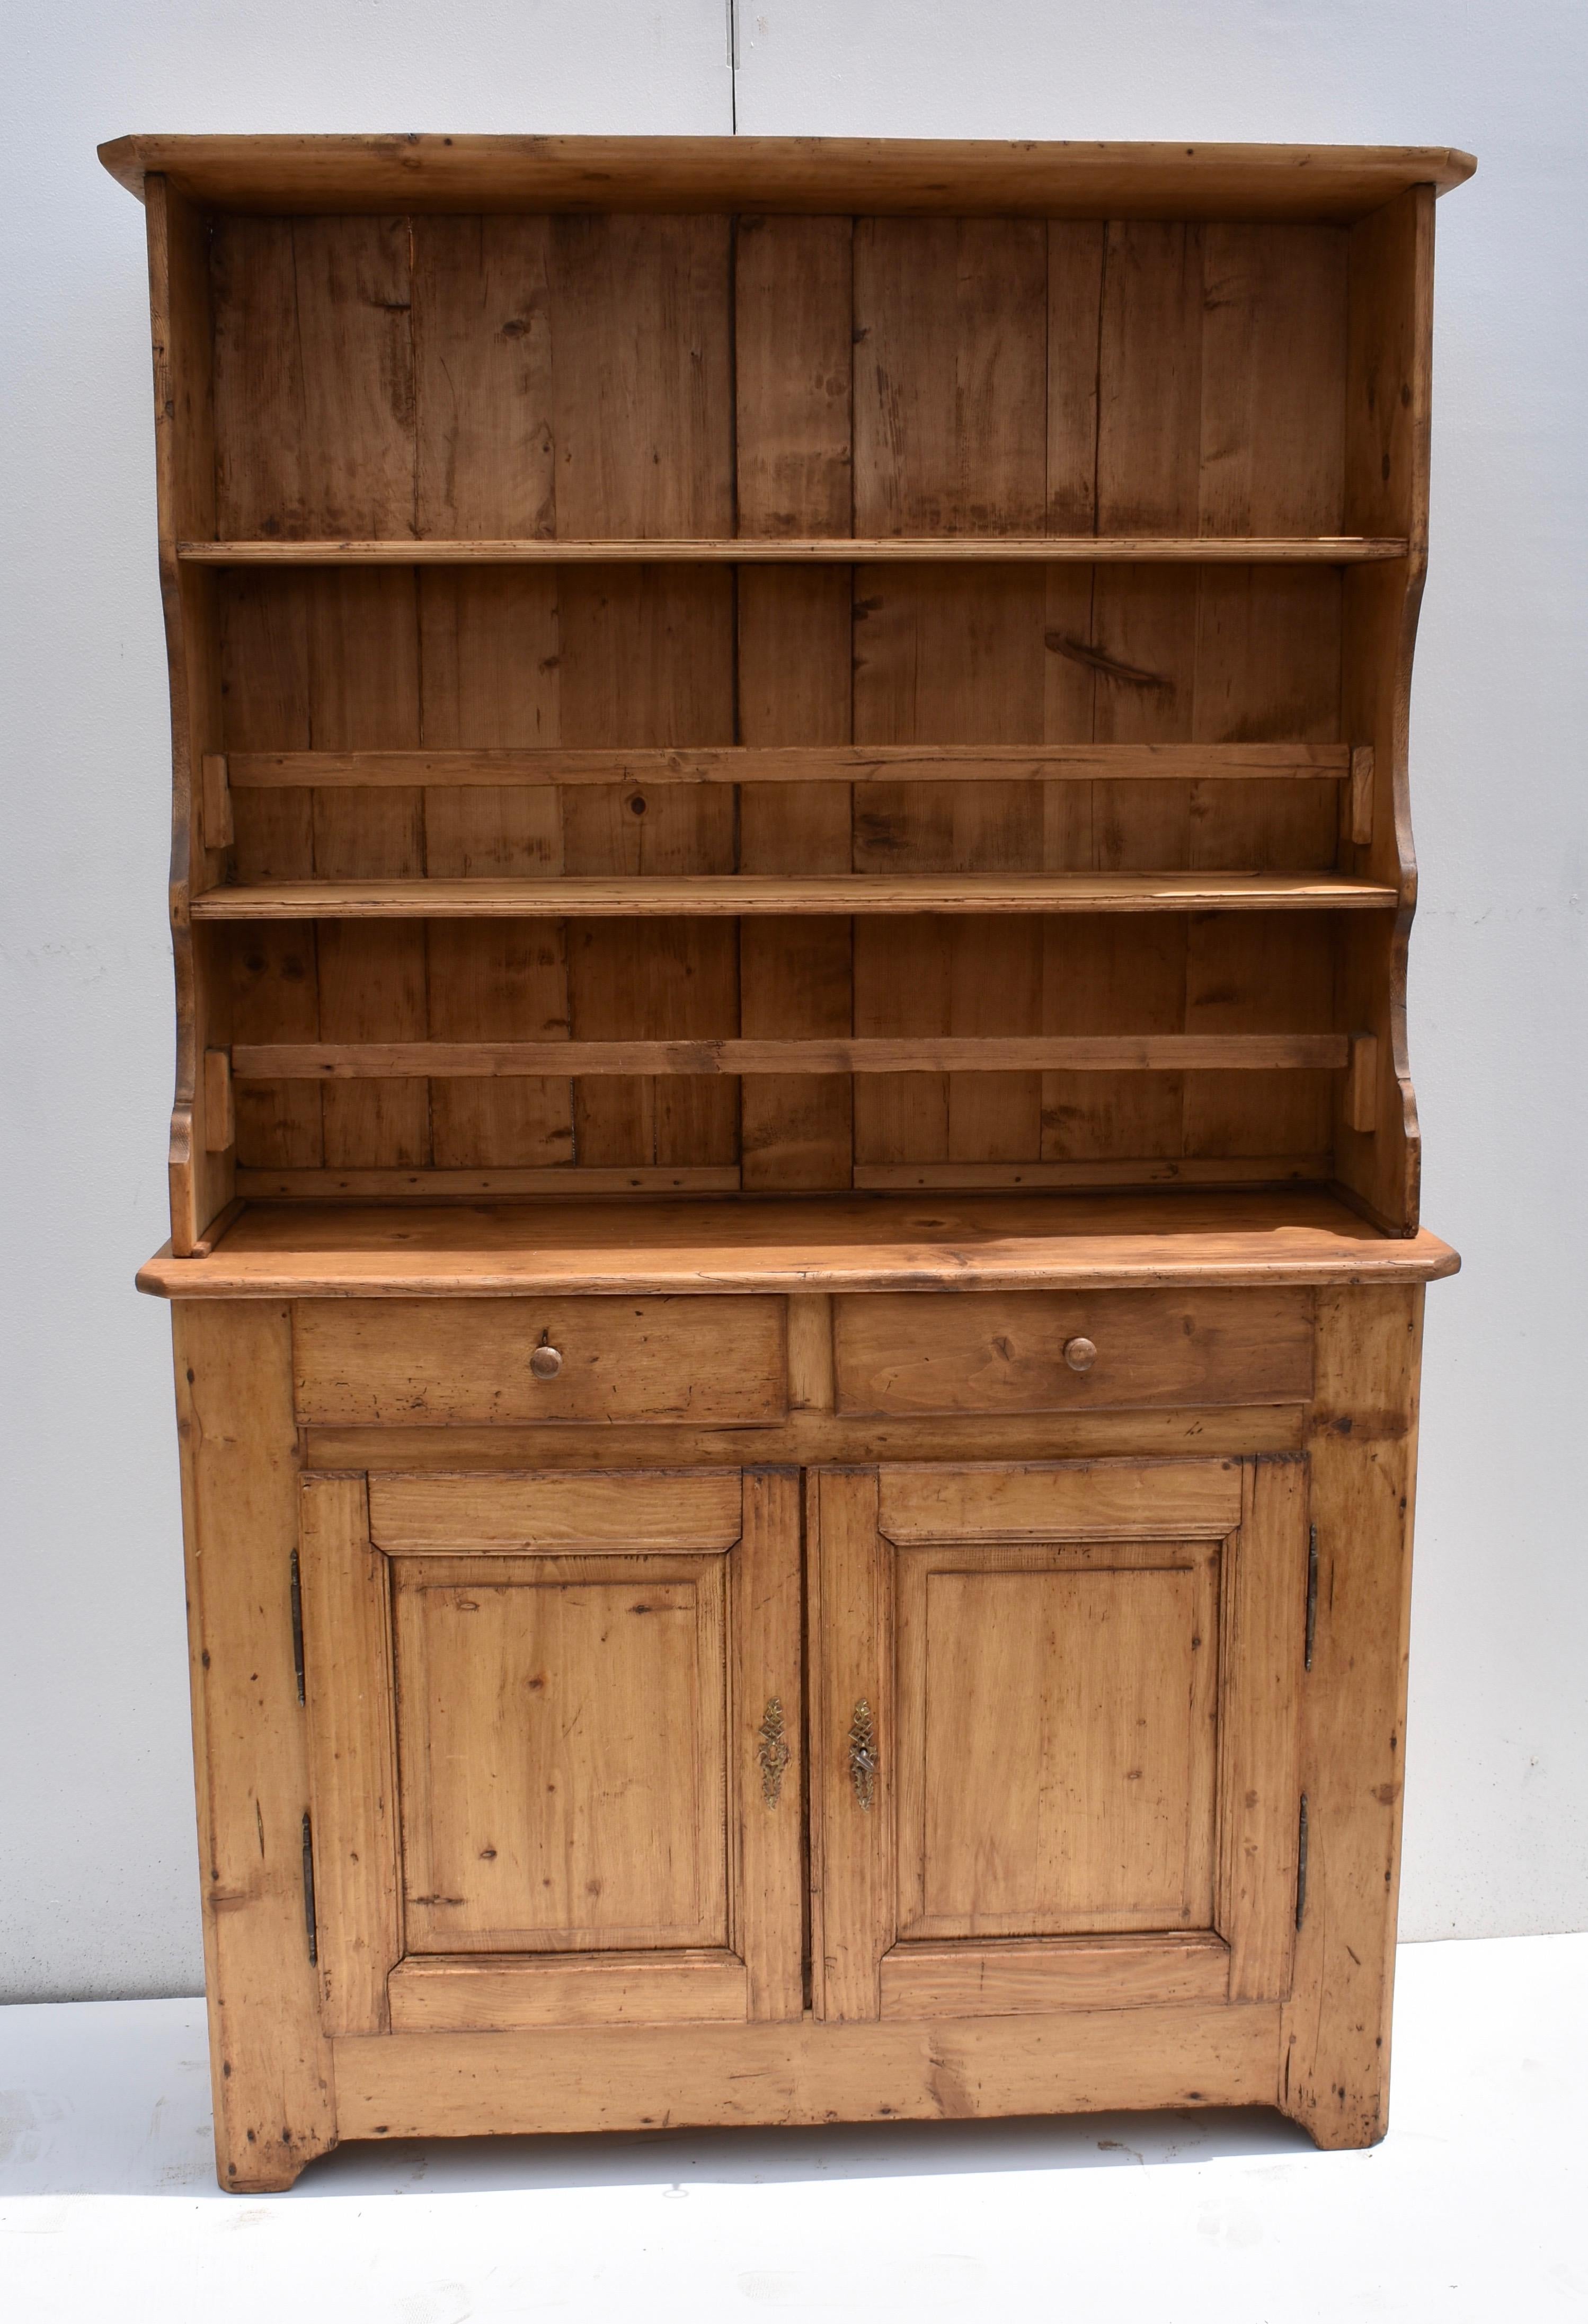 It is rare to find a complete French pine vaissellier, so many of the racks of shelves and sideboard bases became separated over the years. Here is a nice example that this dealer first sold over thirty years ago. The upper section has two shelves